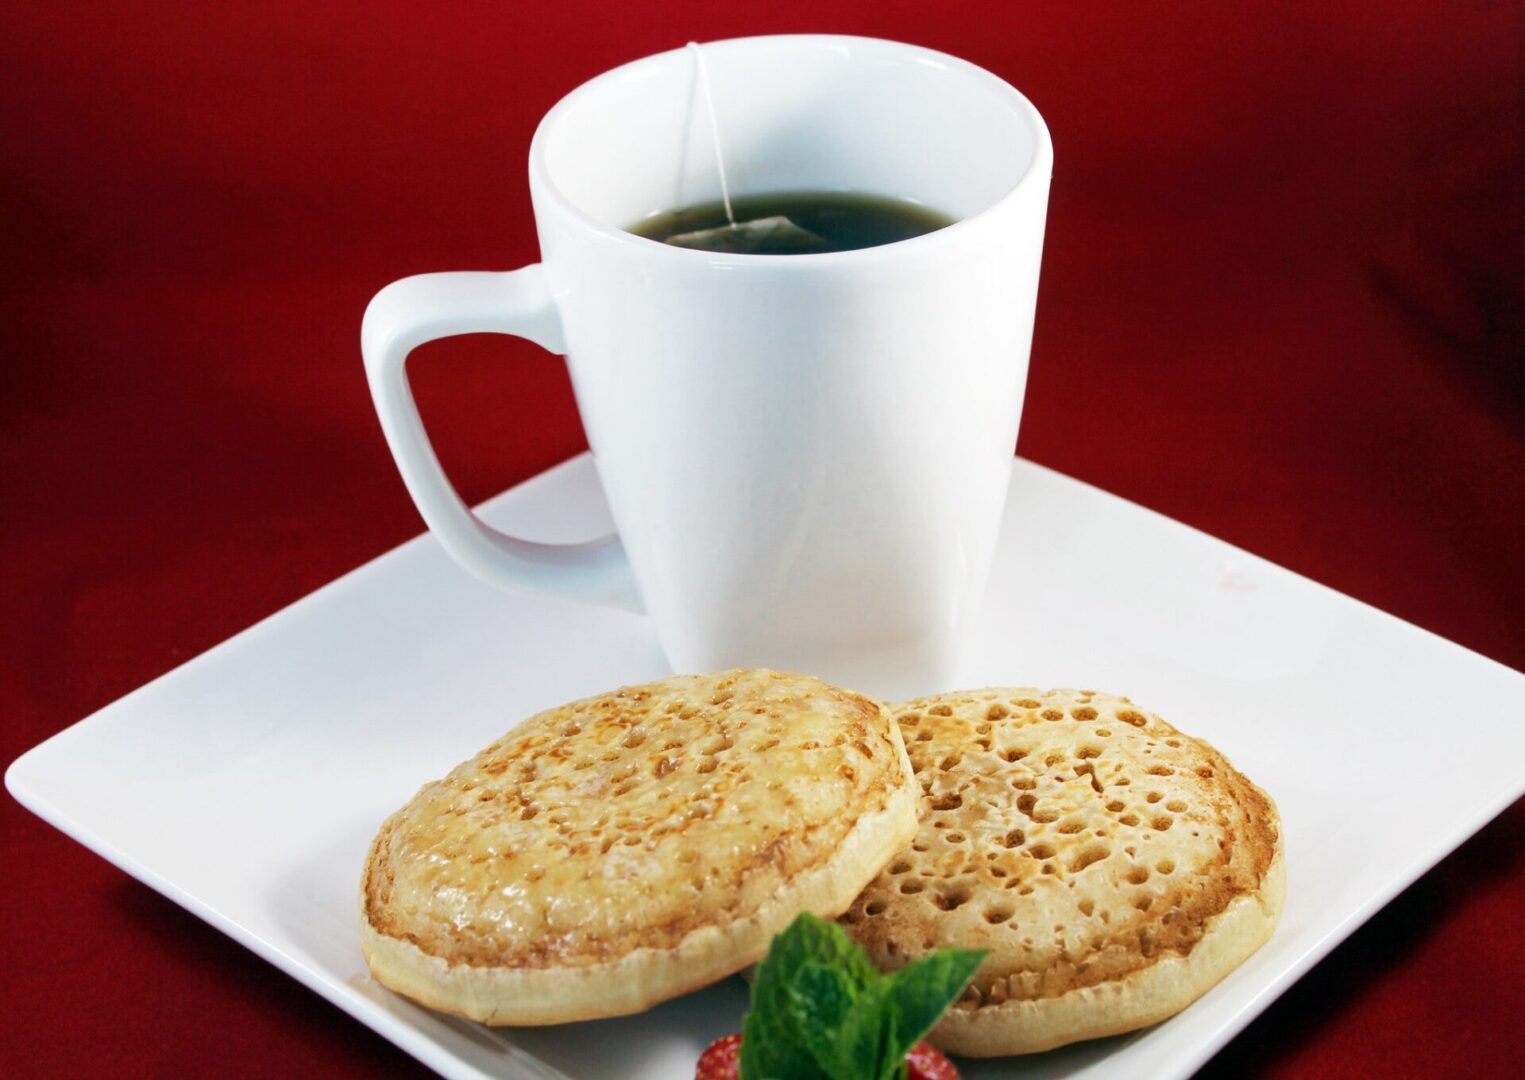 A cup of tea and two english muffins on a plate.